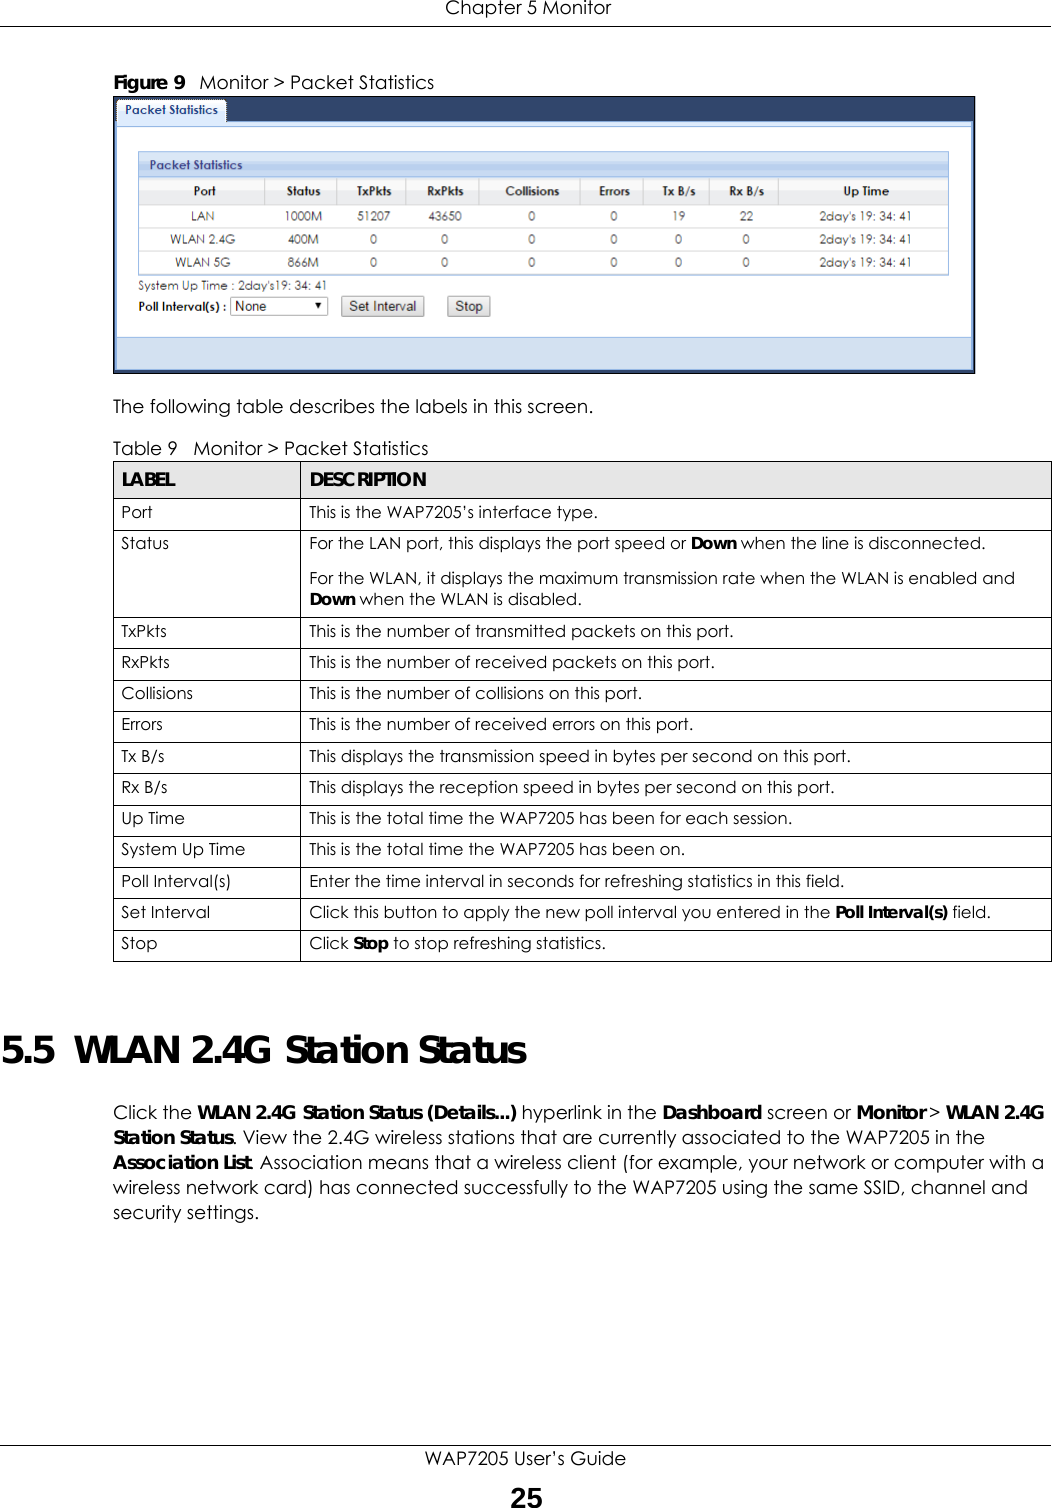  Chapter 5 MonitorWAP7205 User’s Guide25Figure 9   Monitor &gt; Packet Statistics The following table describes the labels in this screen.5.5  WLAN 2.4G Station Status     Click the WLAN 2.4G Station Status (Details...) hyperlink in the Dashboard screen or Monitor &gt; WLAN 2.4G Station Status. View the 2.4G wireless stations that are currently associated to the WAP7205 in the Association List. Association means that a wireless client (for example, your network or computer with a wireless network card) has connected successfully to the WAP7205 using the same SSID, channel and security settings.Table 9   Monitor &gt; Packet StatisticsLABEL DESCRIPTIONPort This is the WAP7205’s interface type.Status  For the LAN port, this displays the port speed or Down when the line is disconnected.For the WLAN, it displays the maximum transmission rate when the WLAN is enabled and Down when the WLAN is disabled.TxPkts  This is the number of transmitted packets on this port.RxPkts  This is the number of received packets on this port.Collisions  This is the number of collisions on this port.Errors This is the number of received errors on this port.Tx B/s  This displays the transmission speed in bytes per second on this port.Rx B/s This displays the reception speed in bytes per second on this port.Up Time This is the total time the WAP7205 has been for each session.System Up Time This is the total time the WAP7205 has been on.Poll Interval(s) Enter the time interval in seconds for refreshing statistics in this field.Set Interval Click this button to apply the new poll interval you entered in the Poll Interval(s) field.Stop Click Stop to stop refreshing statistics.